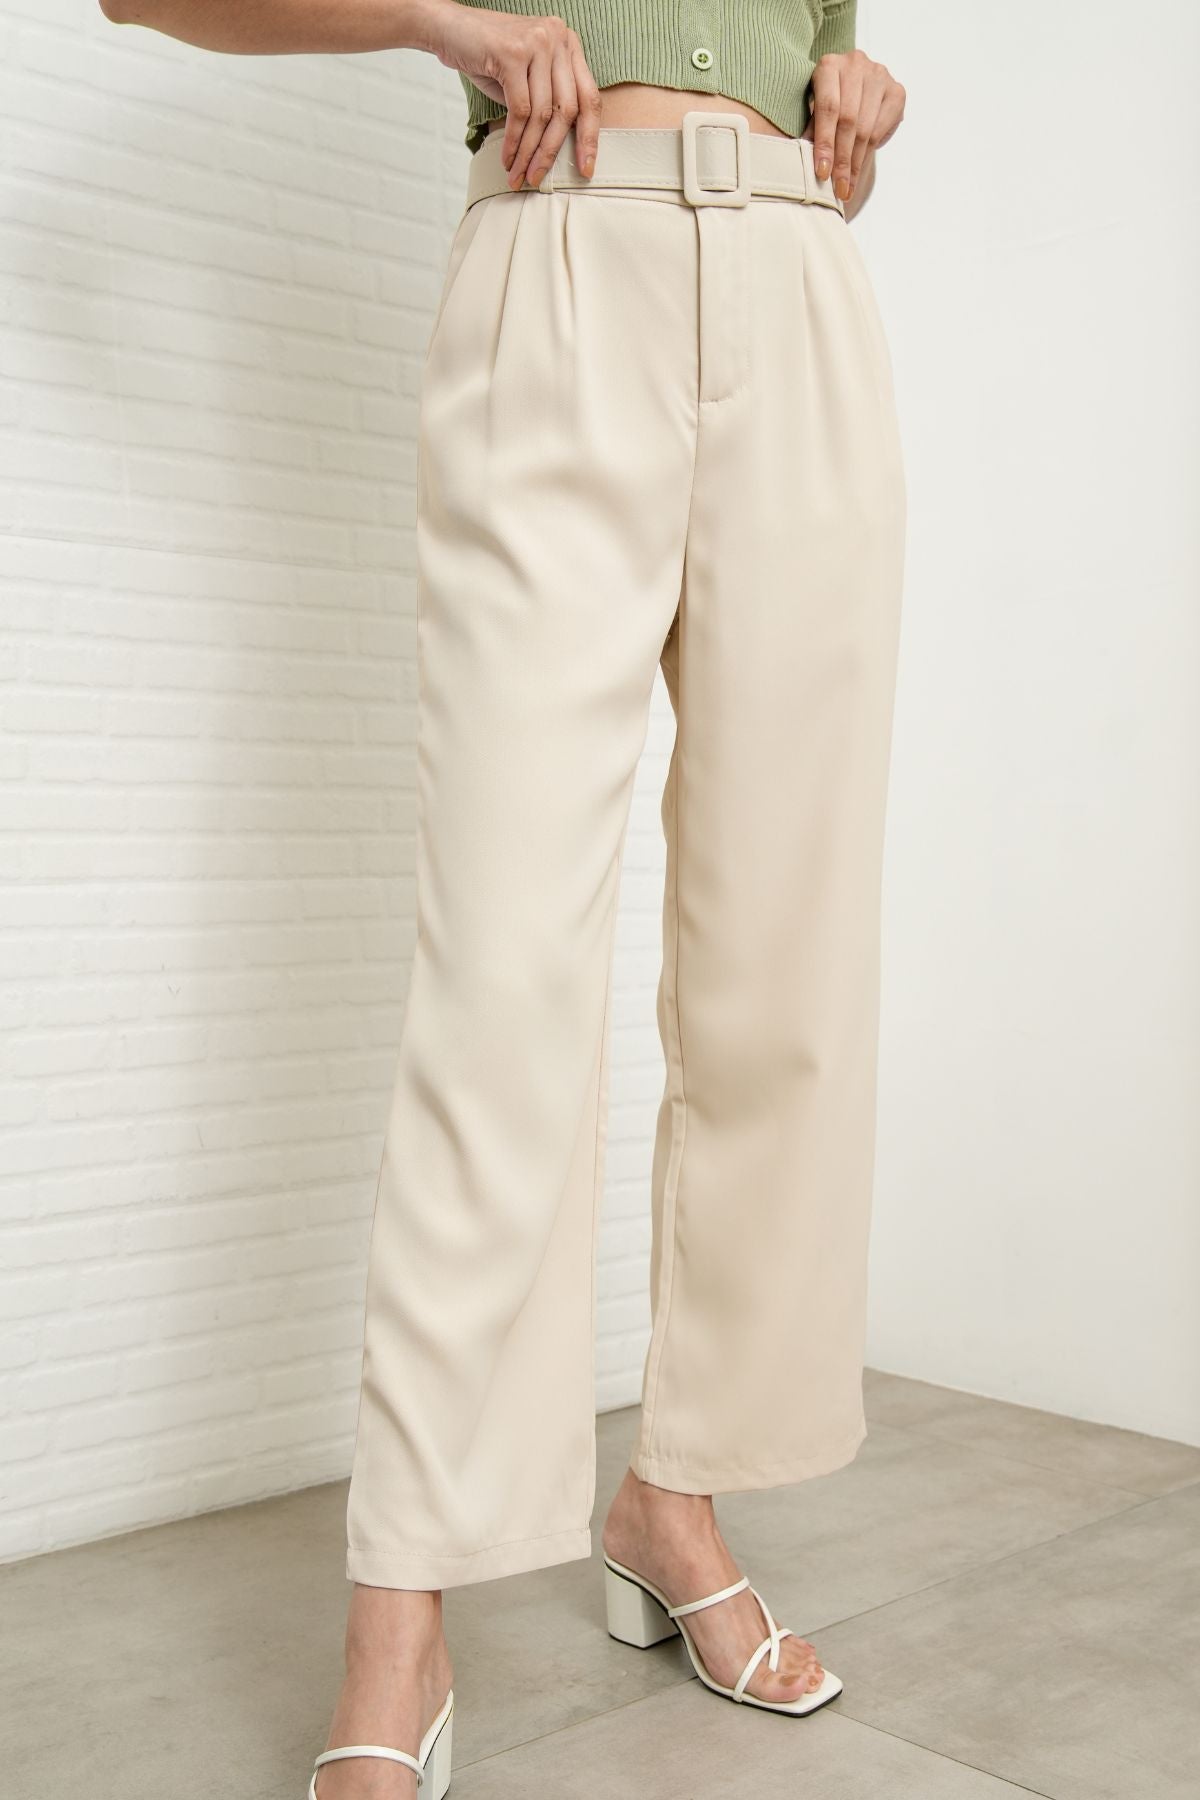 Irena High Waisted Tailored Pants by Shona Joy Online